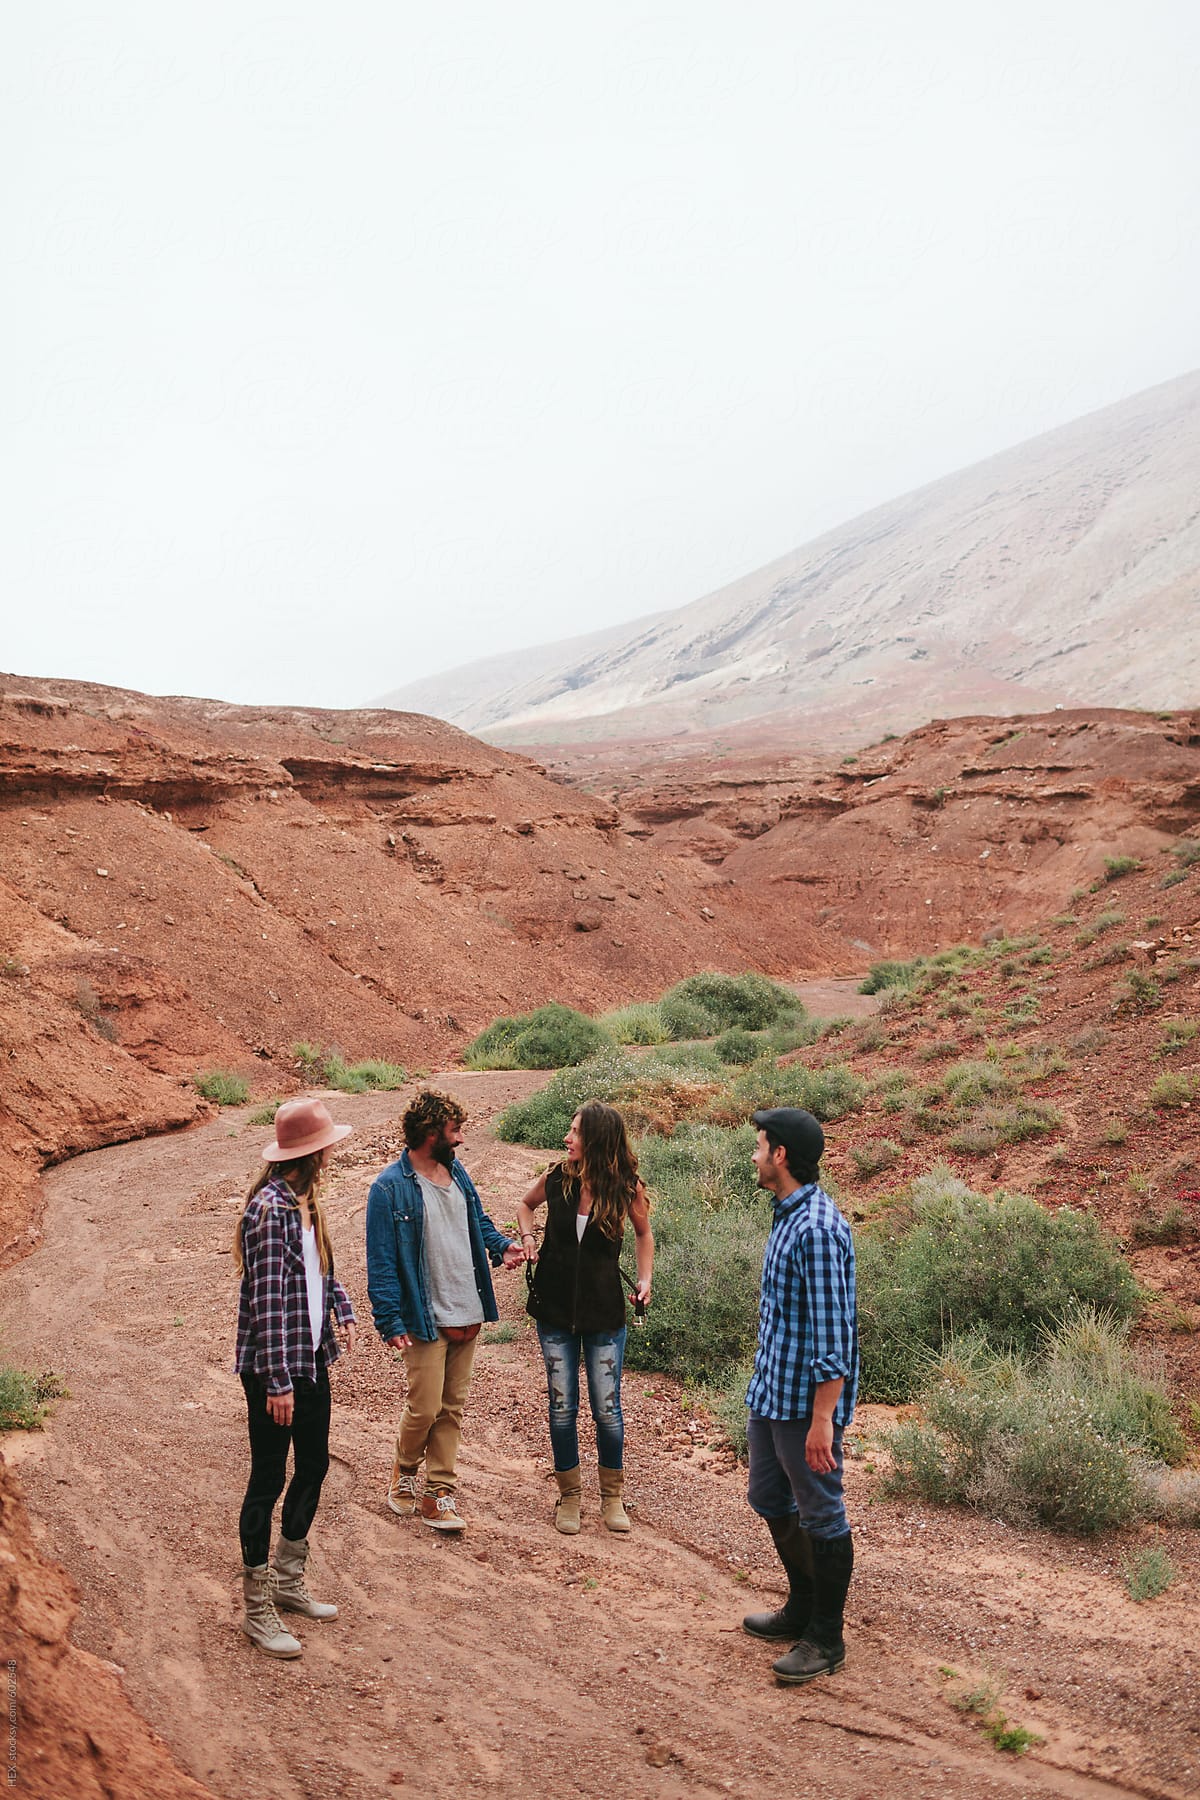 Group of Friends Walking Through a Desert Together